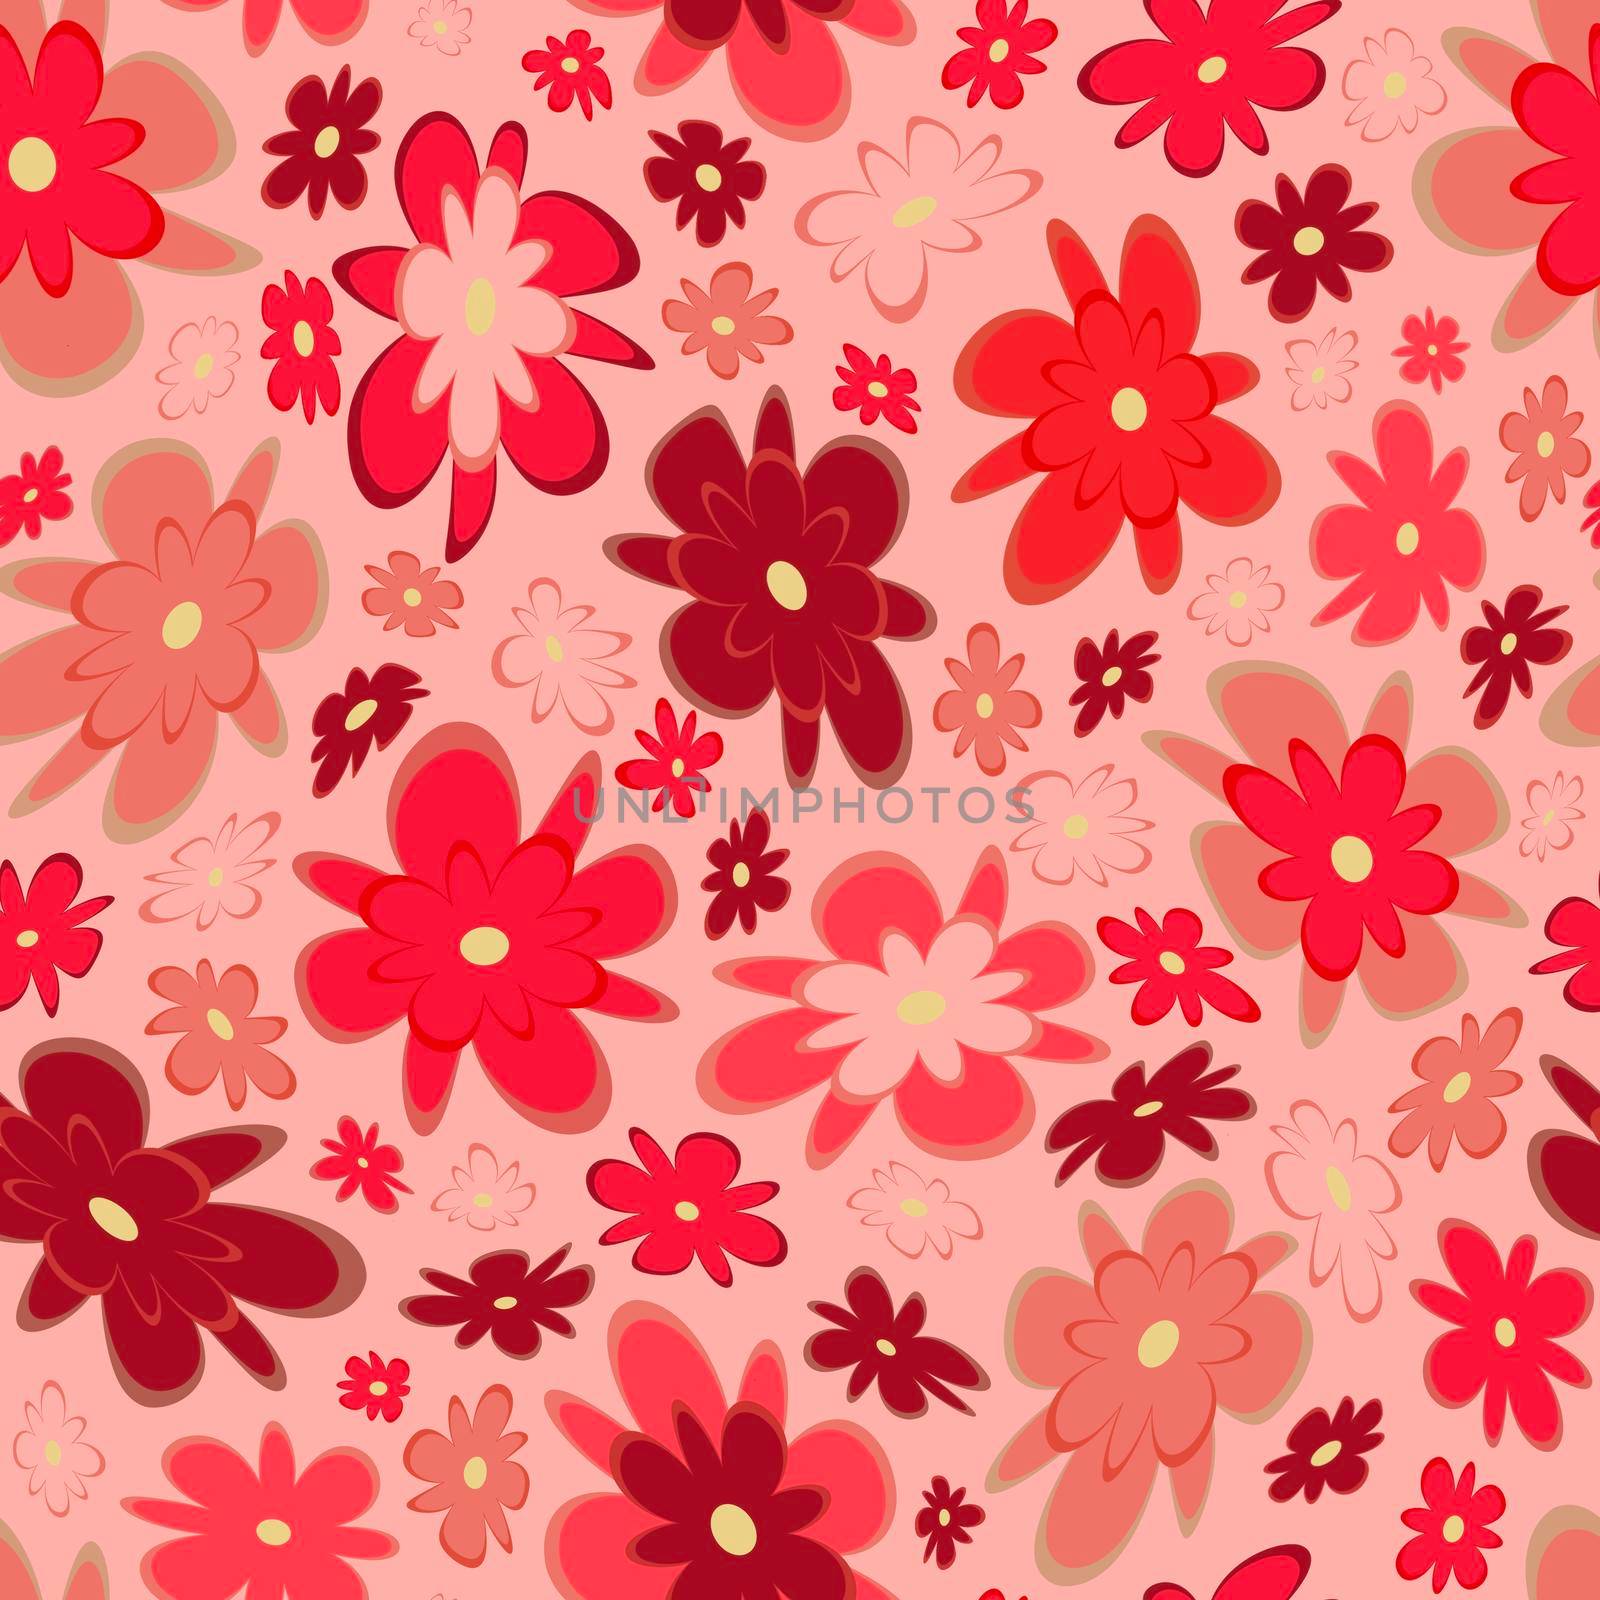 Trendy fabric pattern with miniature flowers.Summer print.Fashion design.Motifs scattered random.Elegant template for fashion prints.Good for fashion,textile,fabric,gift wrapping paper.Coral on pink.